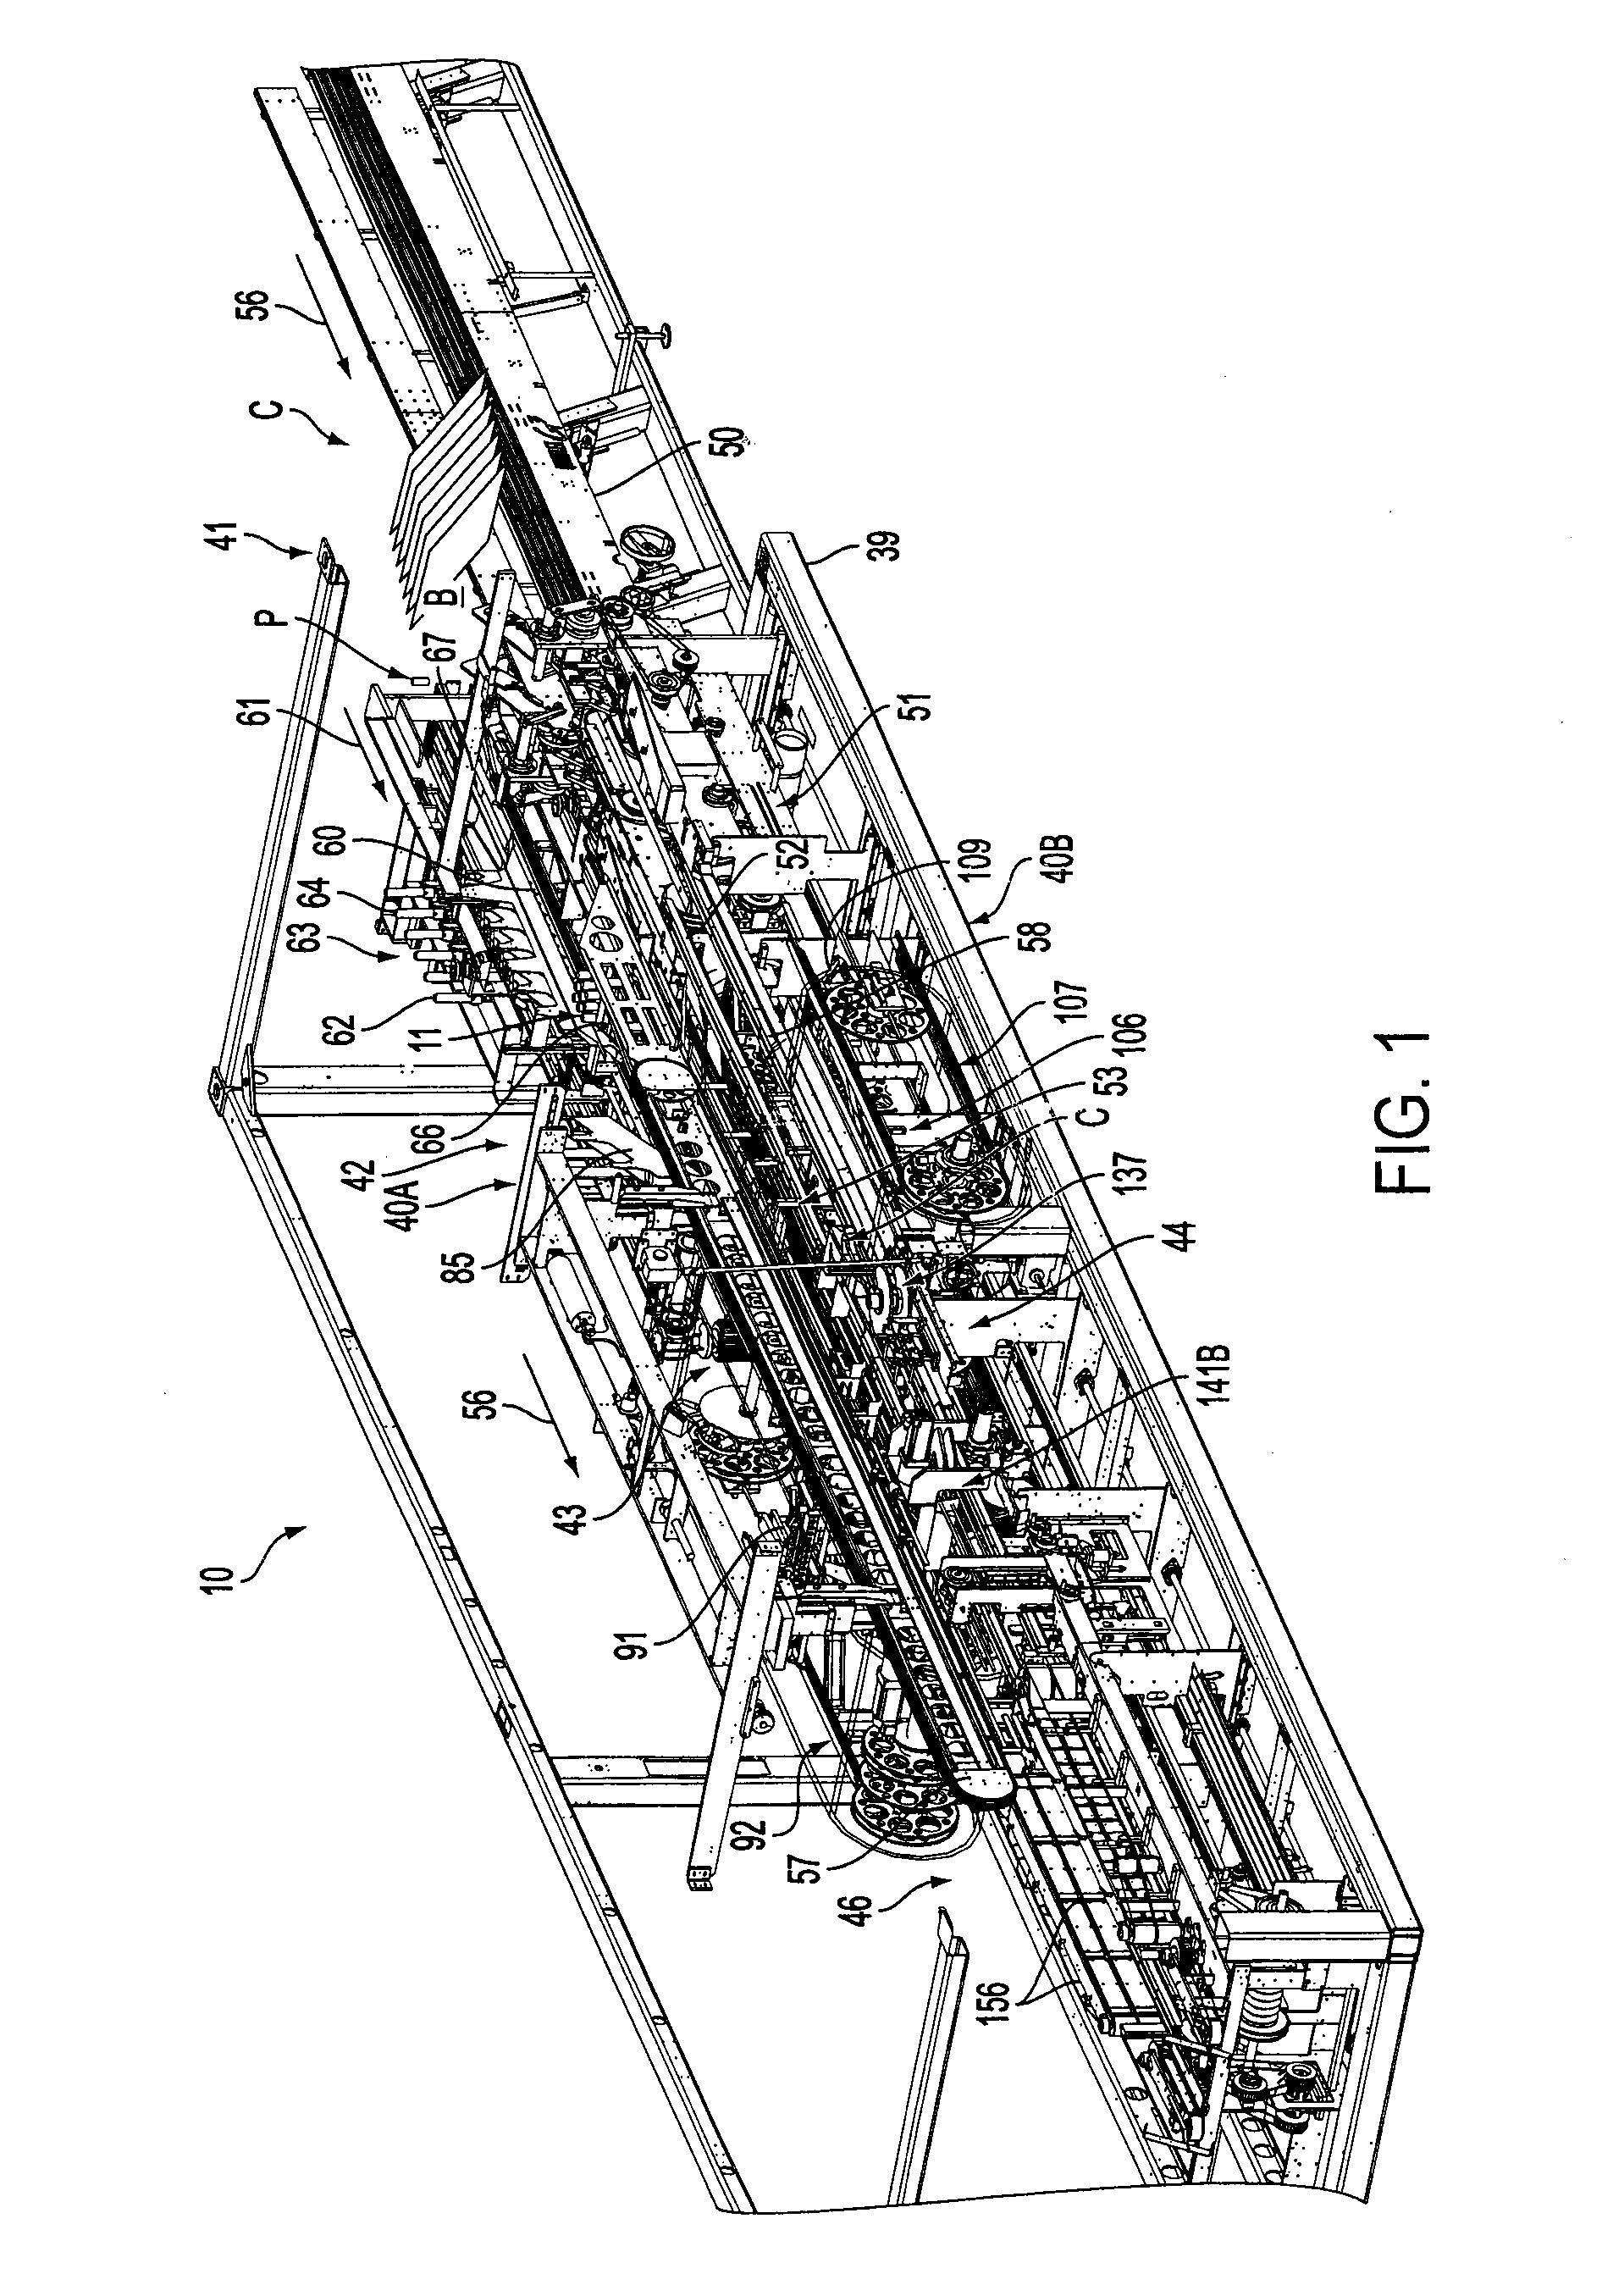 System and method for packaging of nested products